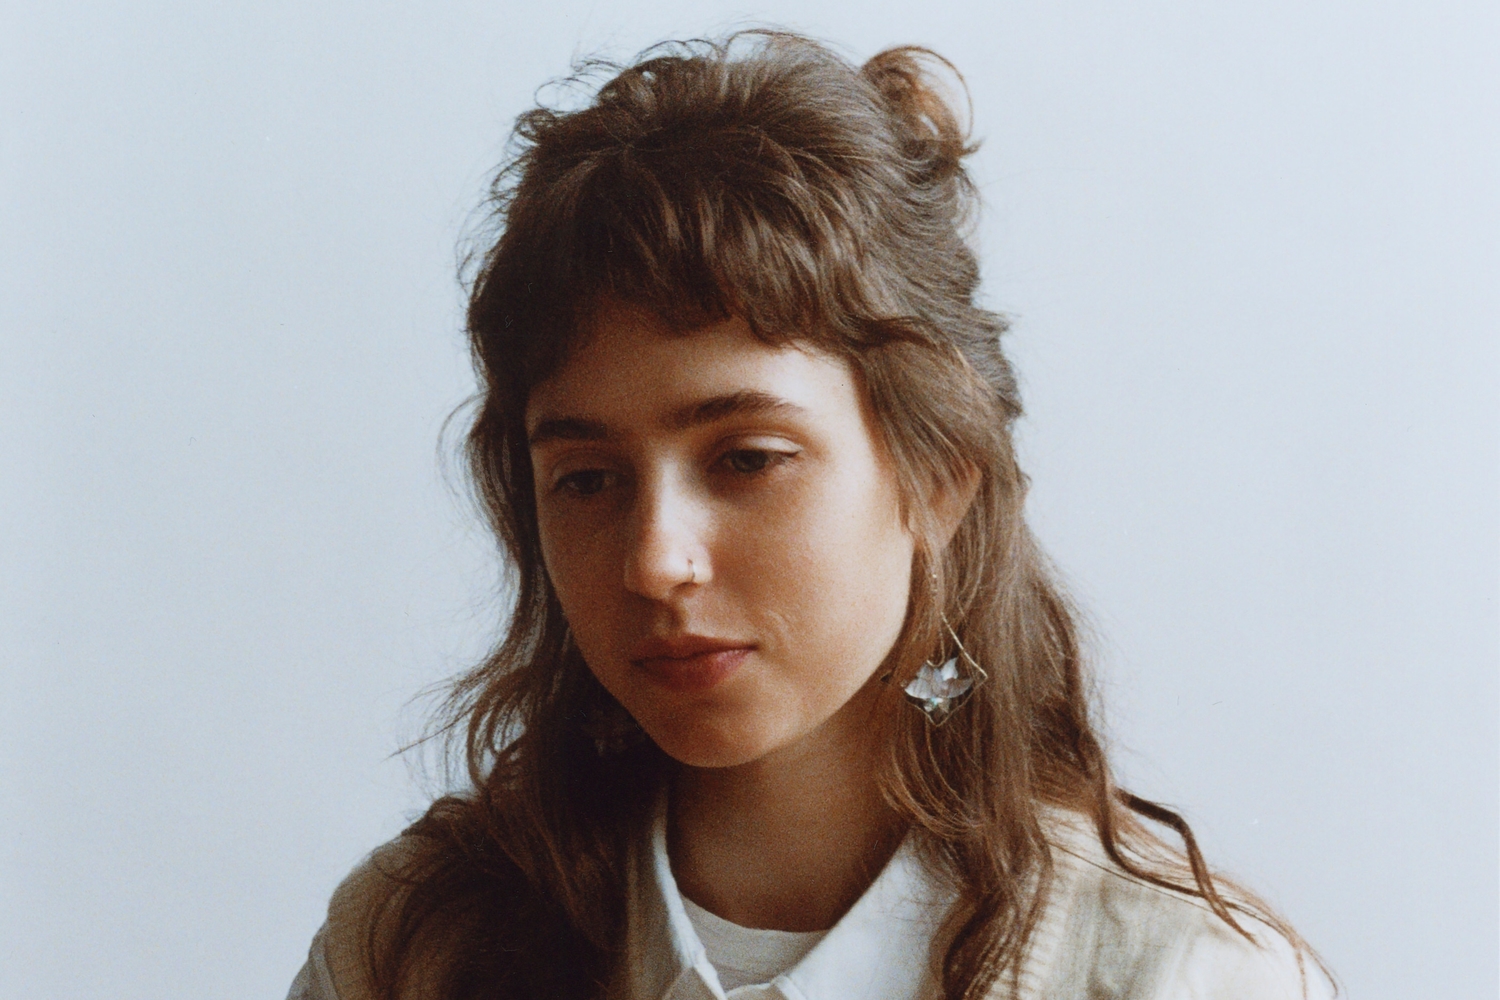 Clairo shares new single 'Nomad' from upcoming album 'Charm'